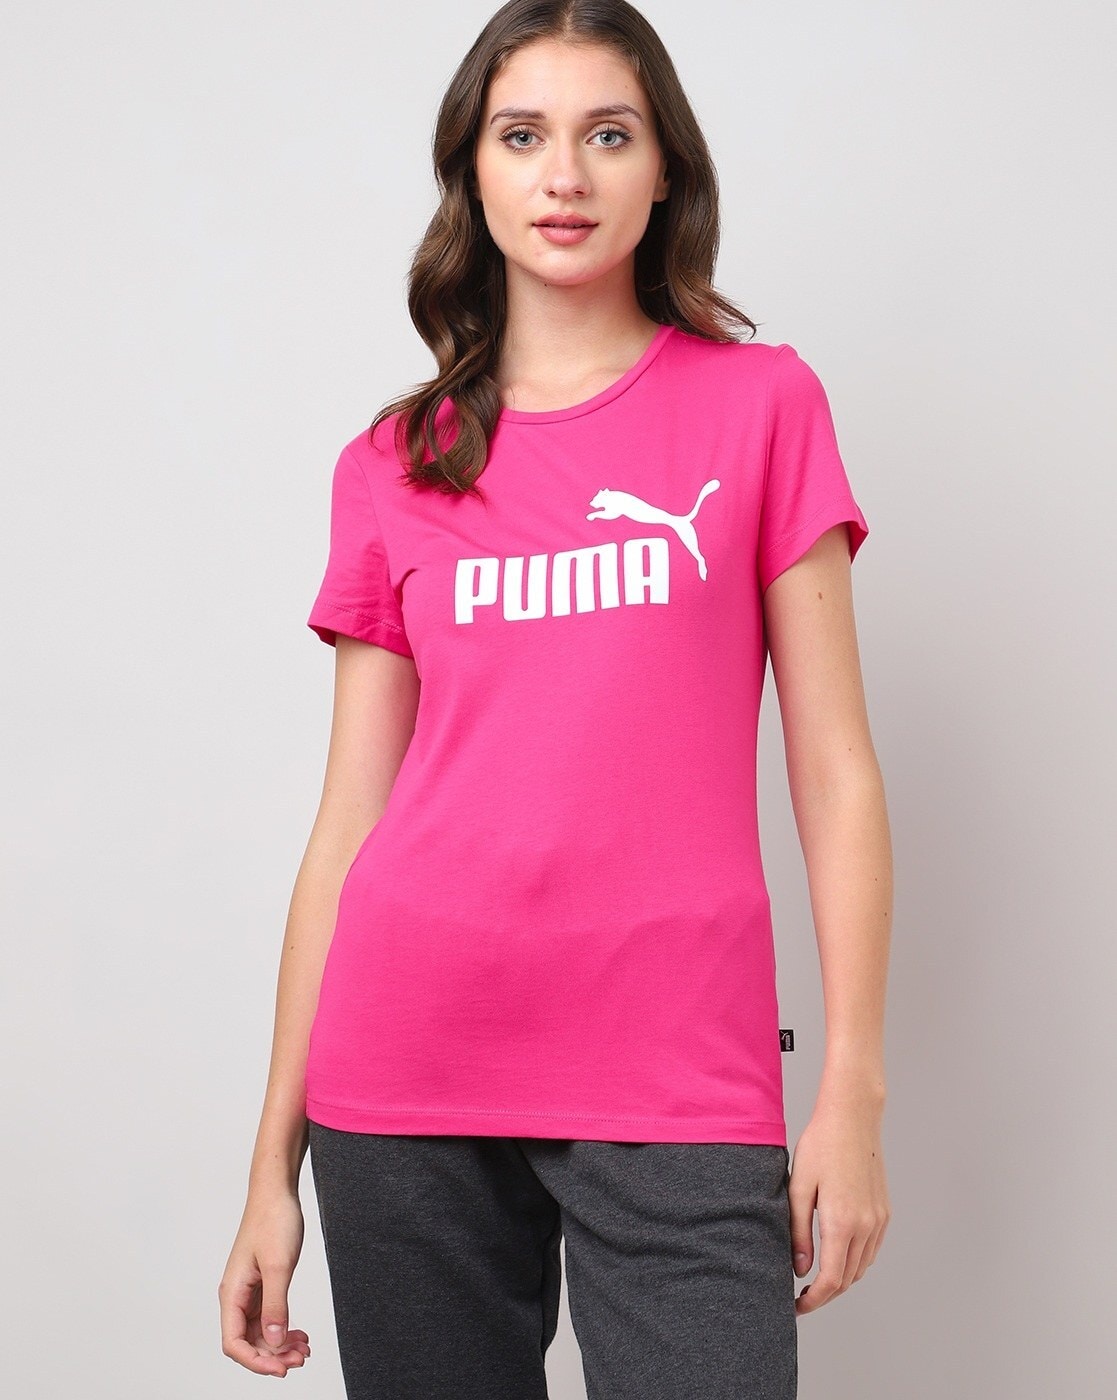 Puma Women Online Buy Tshirts by Pink for